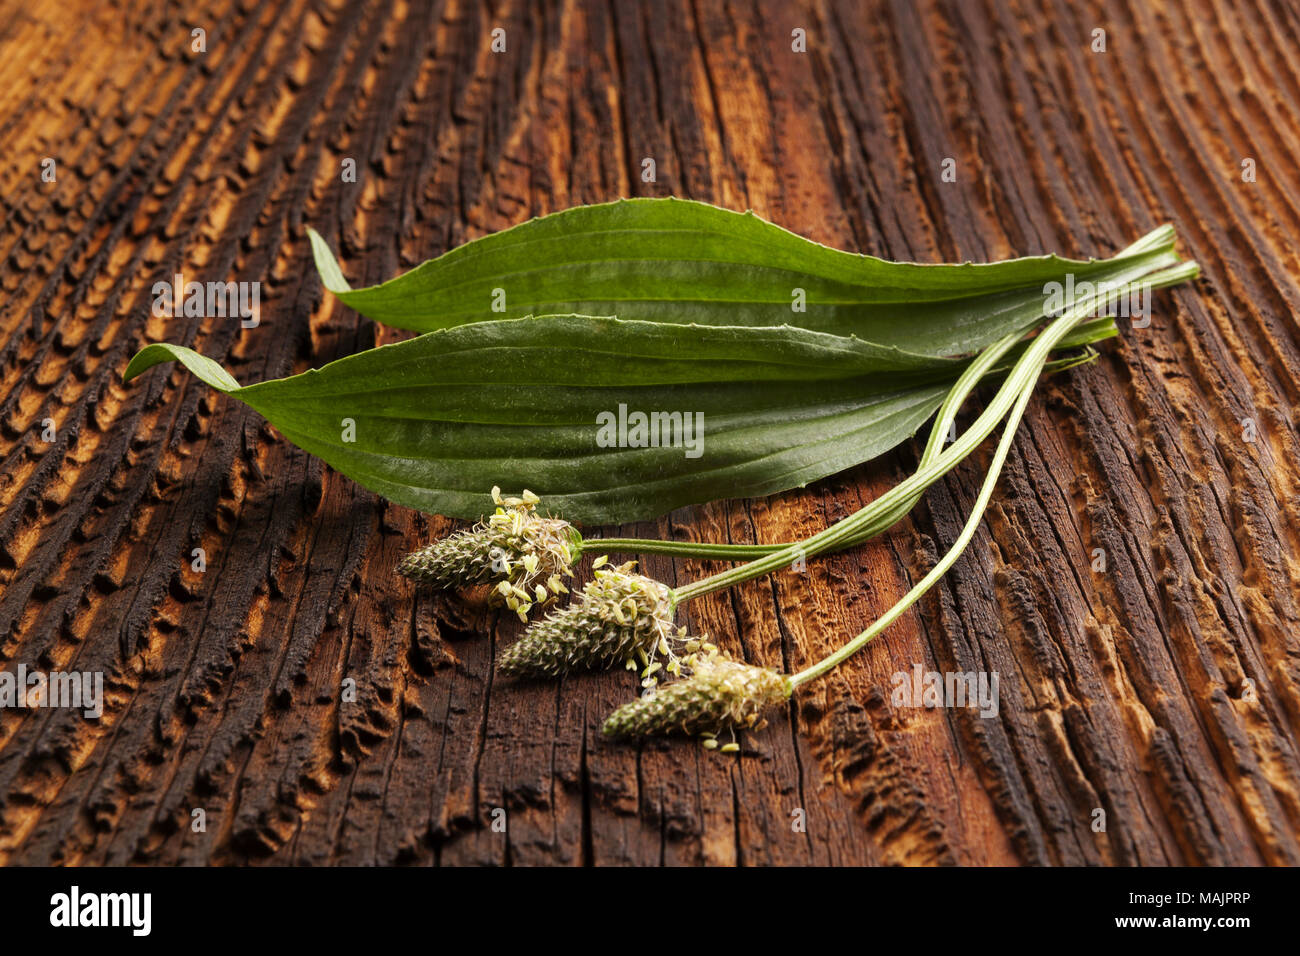 Healthy Green Ribwort plantain on wooden table. Narrowleaf plantain, medicinal plant. Stock Photo